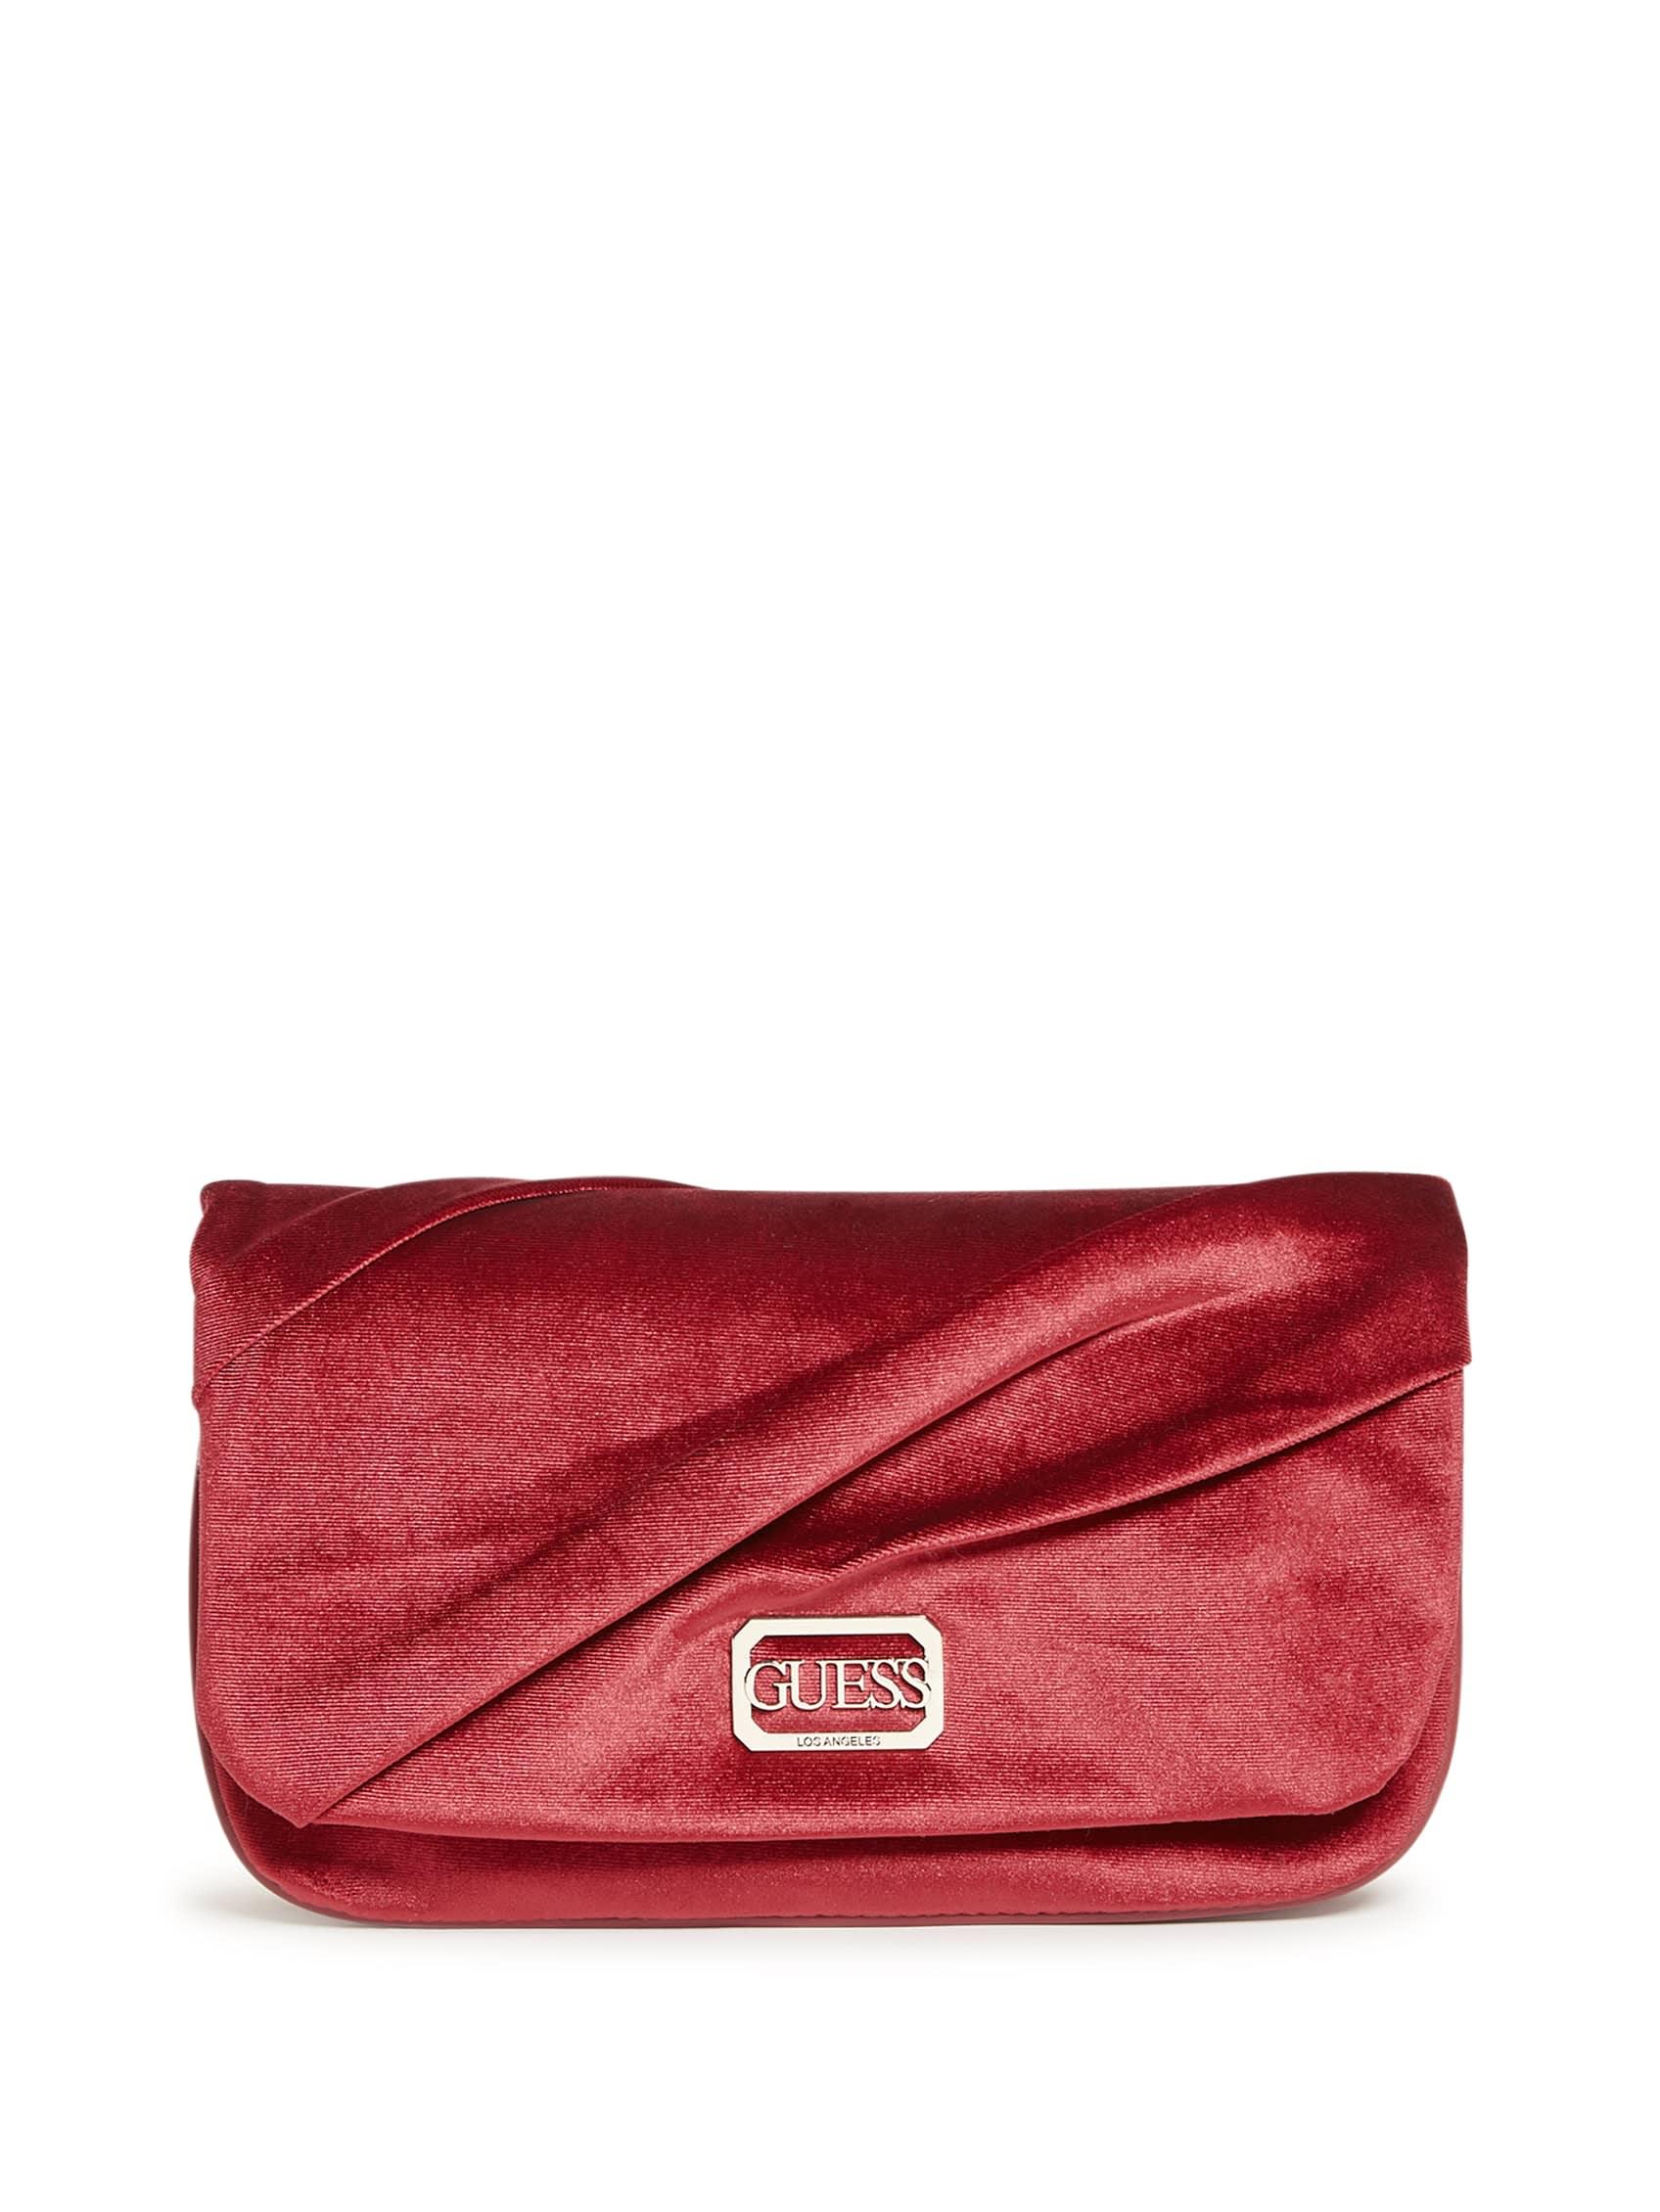 Guess Factory Allegra Pleated Clutch in Red | Lyst